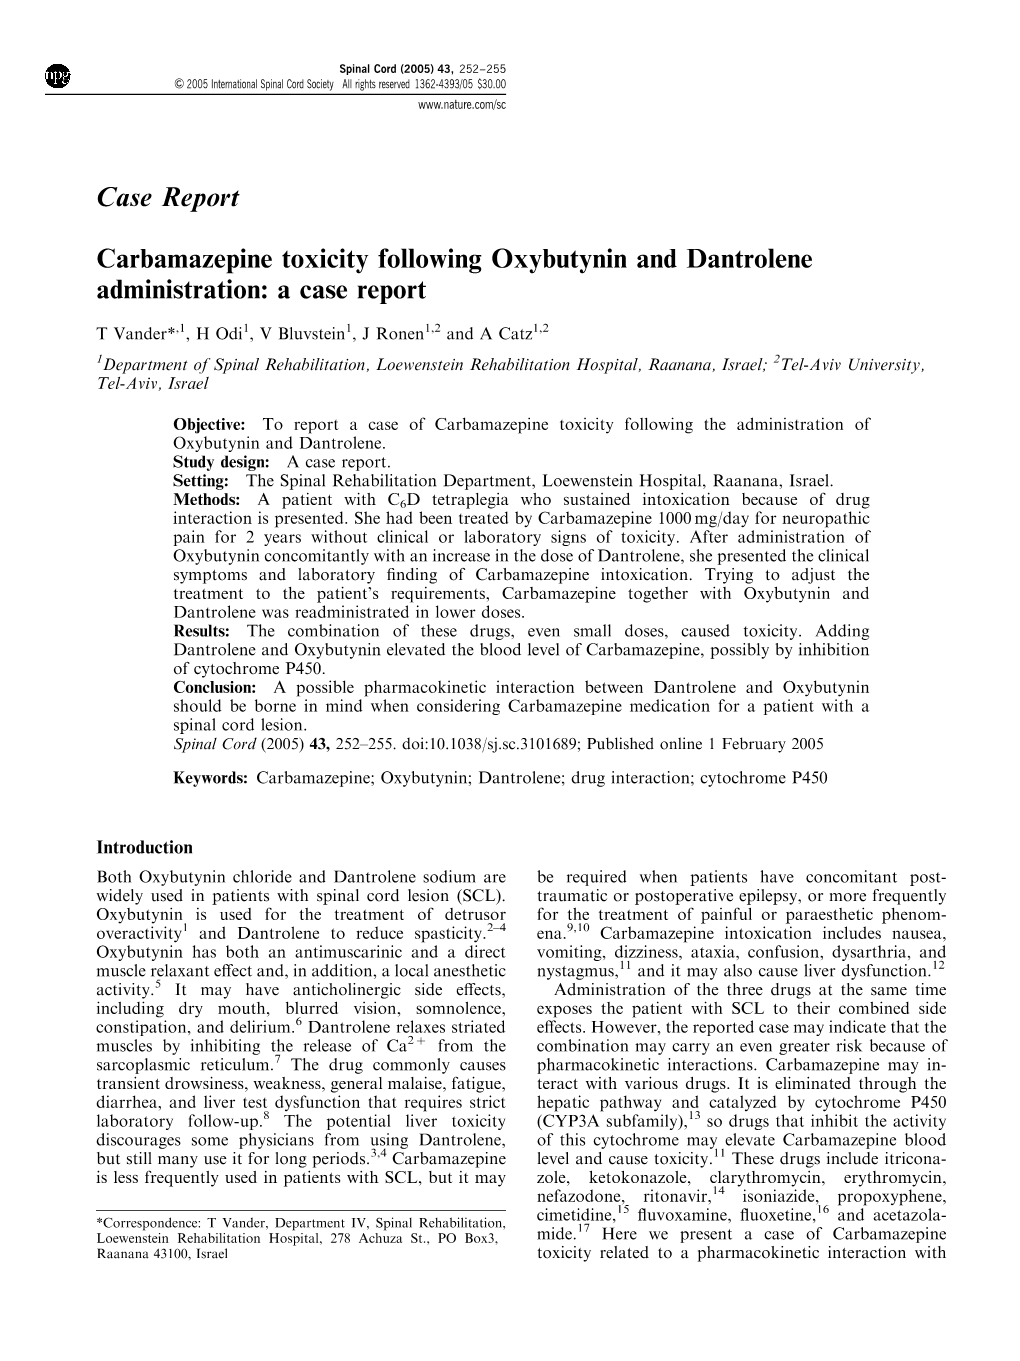 Case Report Carbamazepine Toxicity Following Oxybutynin And